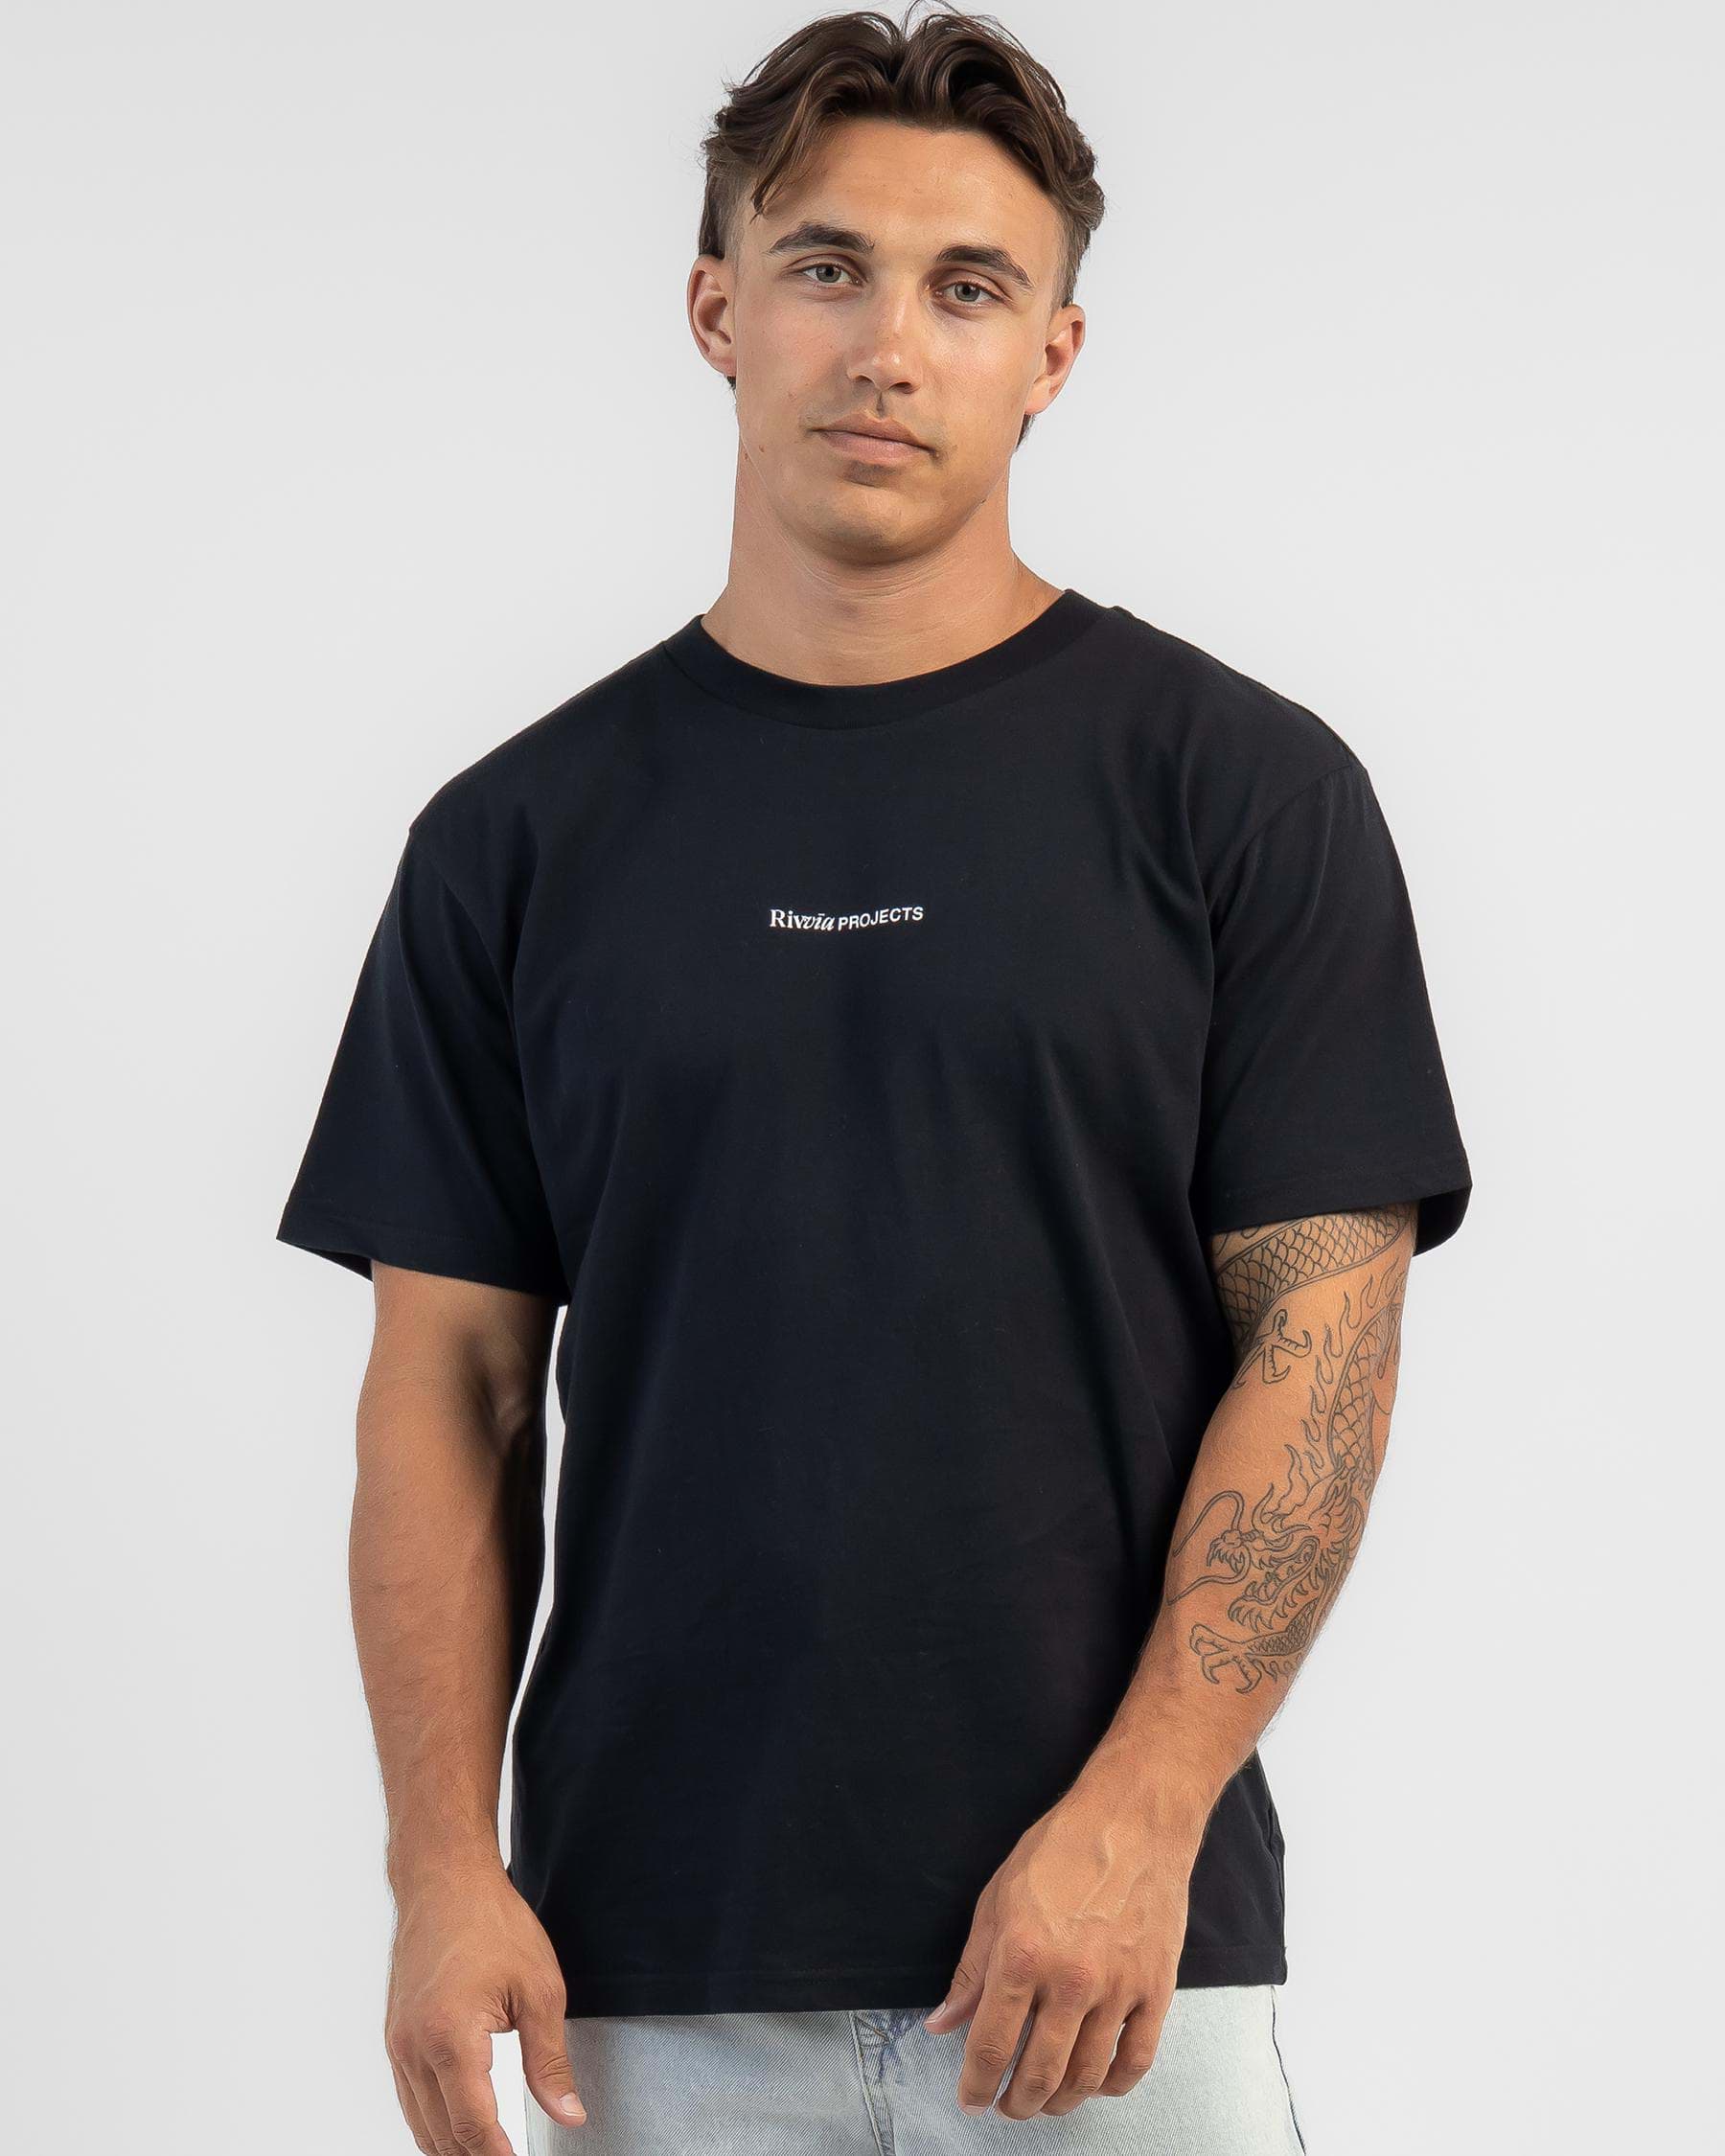 Rivvia Projecting T-Shirt In Black - FREE* Shipping & Easy Returns